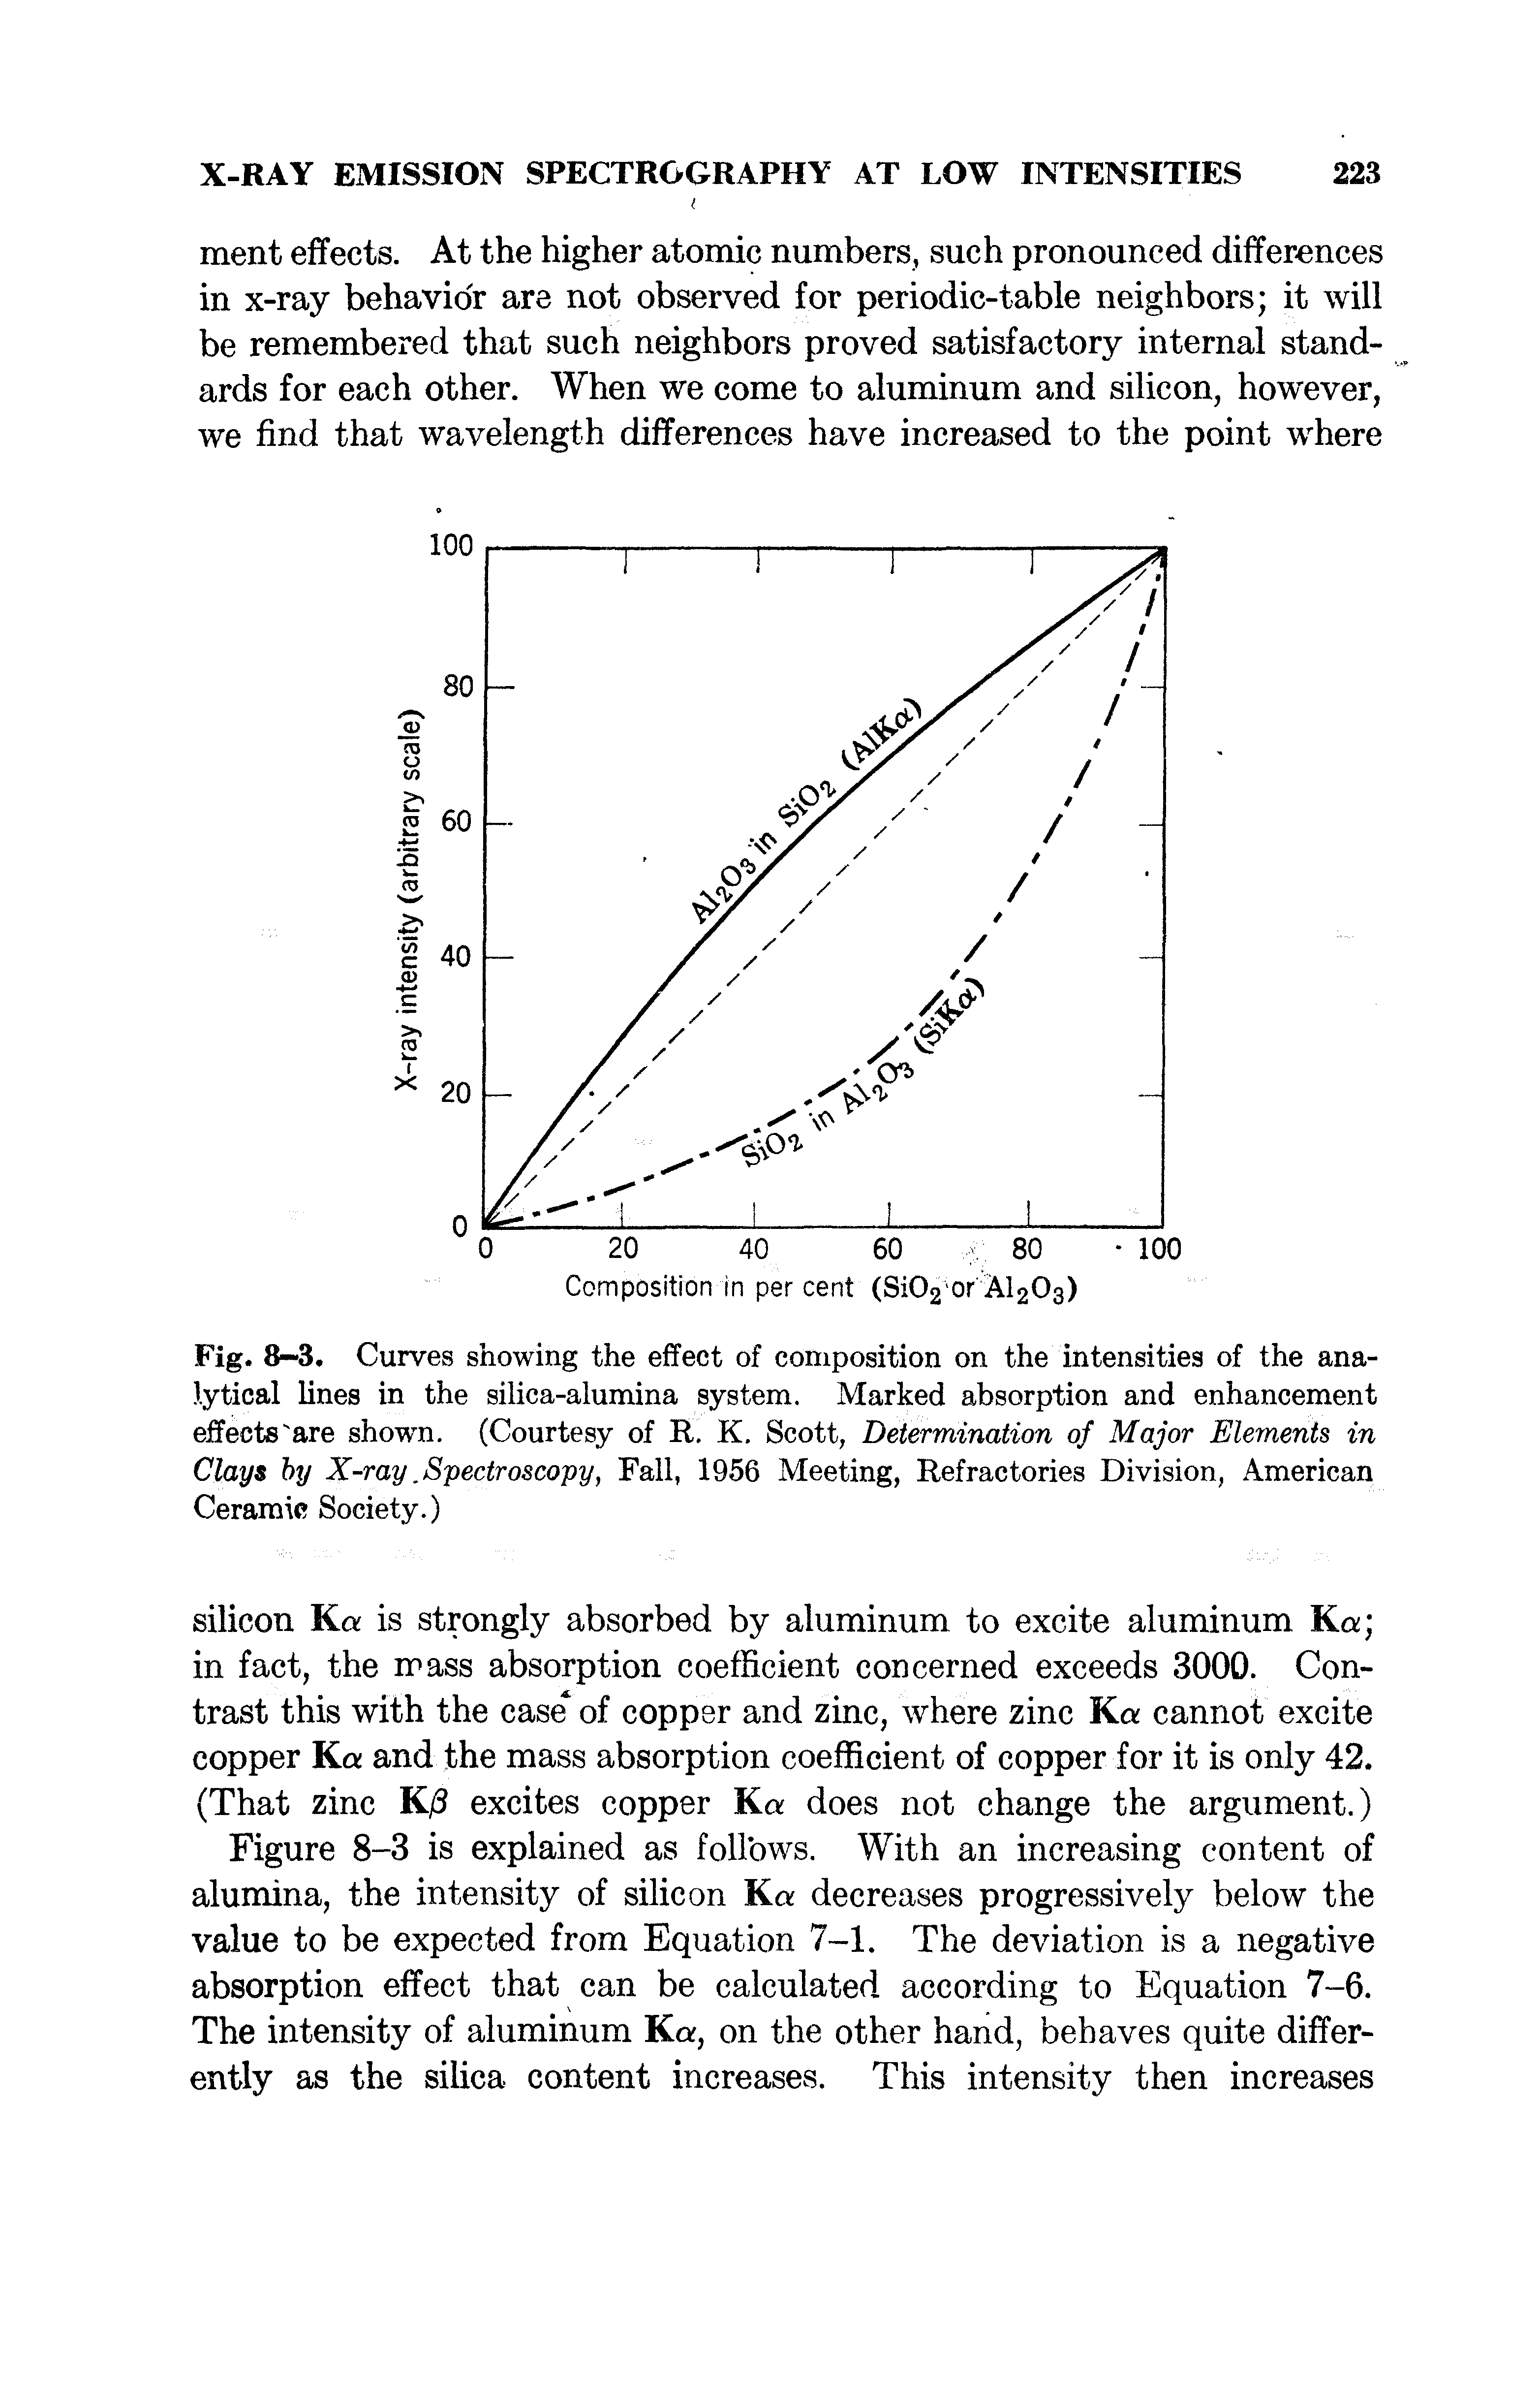 Fig. 8-3. Curves showing the effect of composition on the intensities of the analytical lines in the silica-alumina system. Marked absorption and enhancement effects "are showm. (Courtesy of K. K. Scott, Determination of Major Elements in Clays by X-ray. Spectroscopy, Fall, 1956 Meeting, Refractories Division, American Ceramic Society.)...